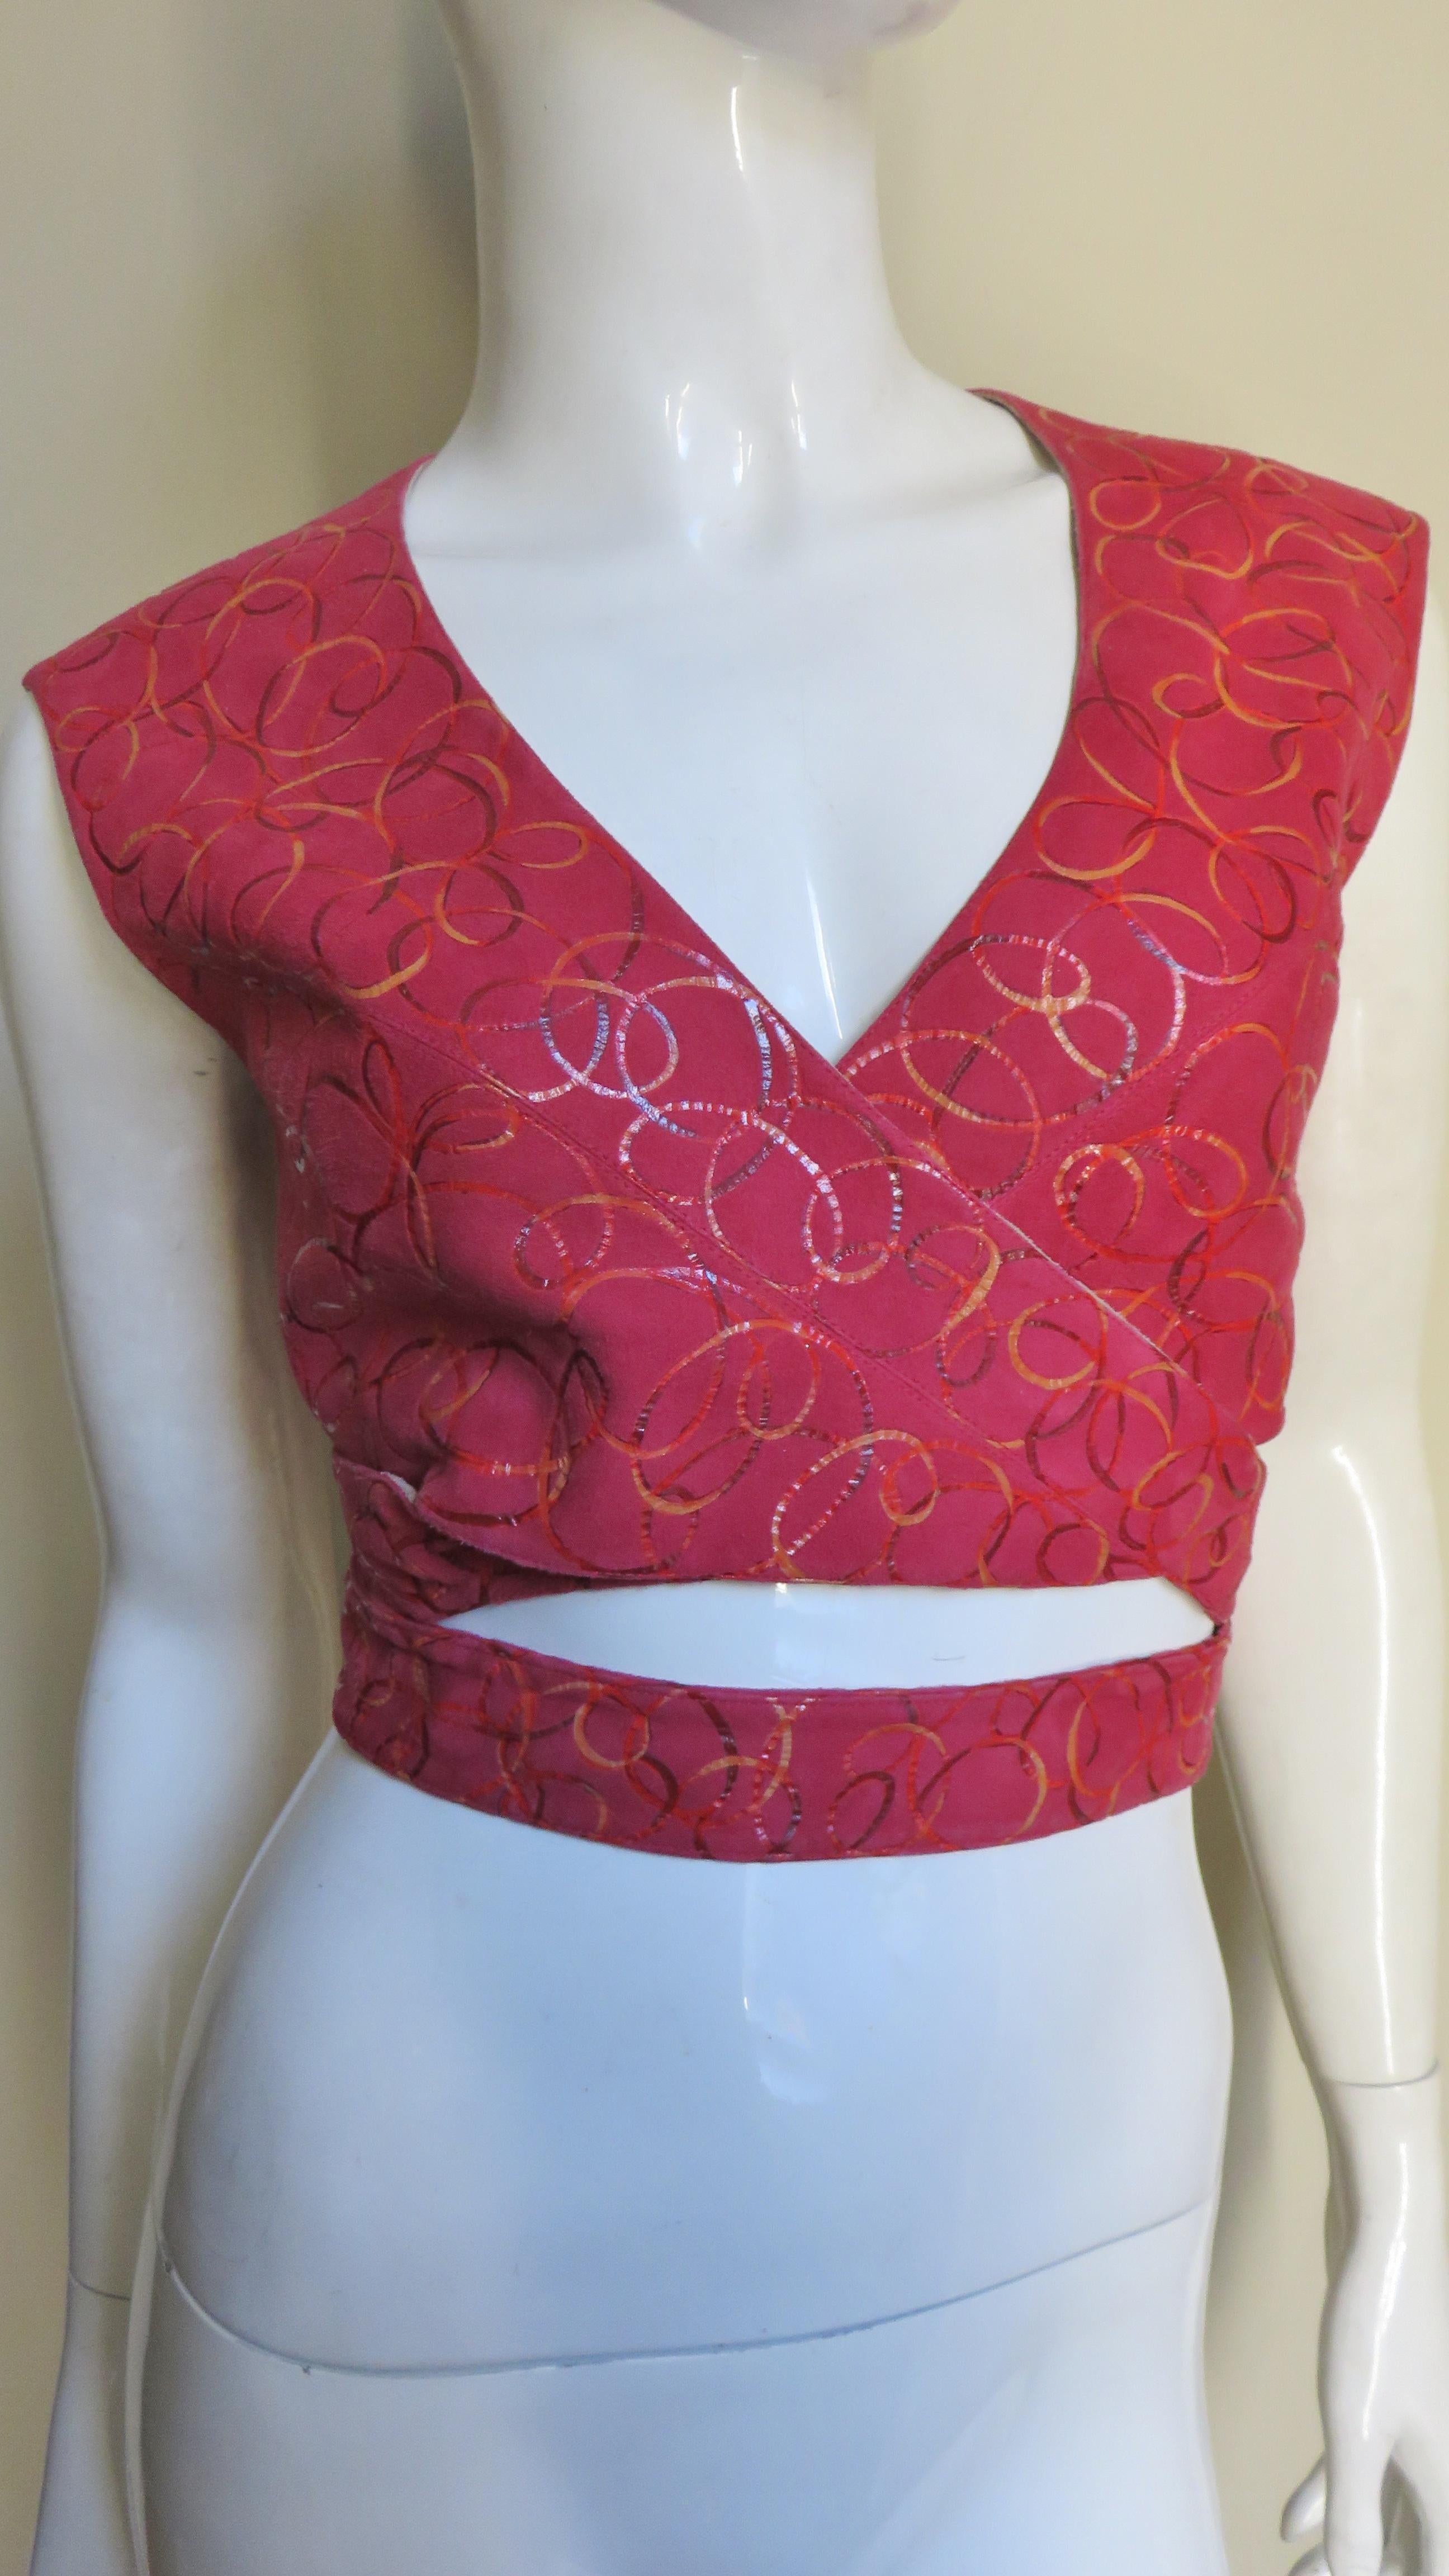 A fabulous top, vest in red suede imprinted with a subtle circular pattern from Azzedine Alaia. It is sleeveless crossing at the front with straps extending on each side wrapping around the waist and closing with an adjustable buckle. It is lined in